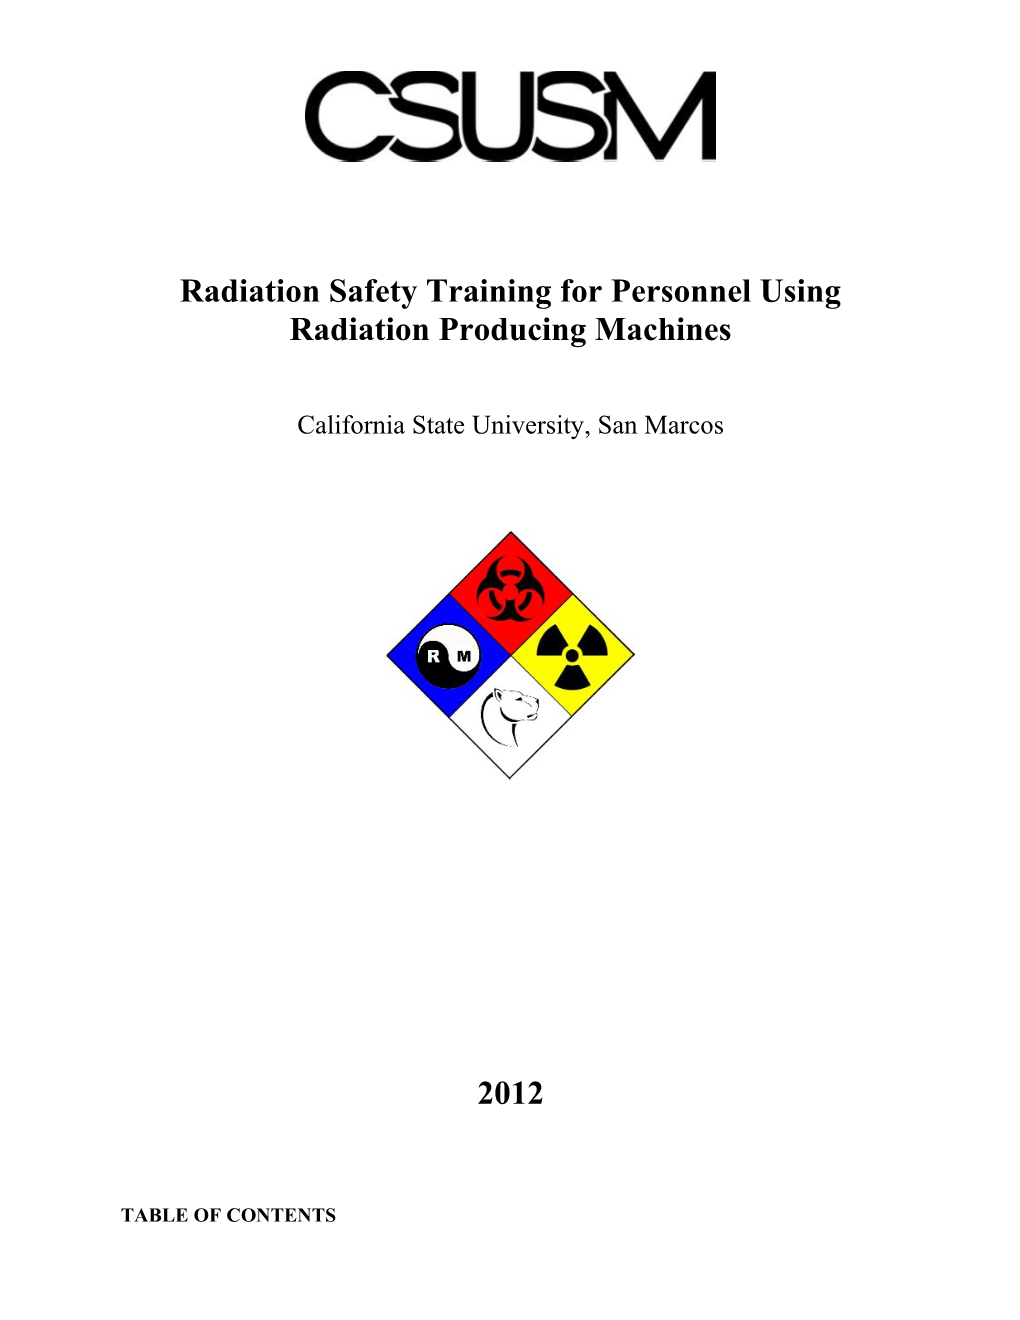 Radiation Safety Training for Personnel Using Radiation Producing Machines